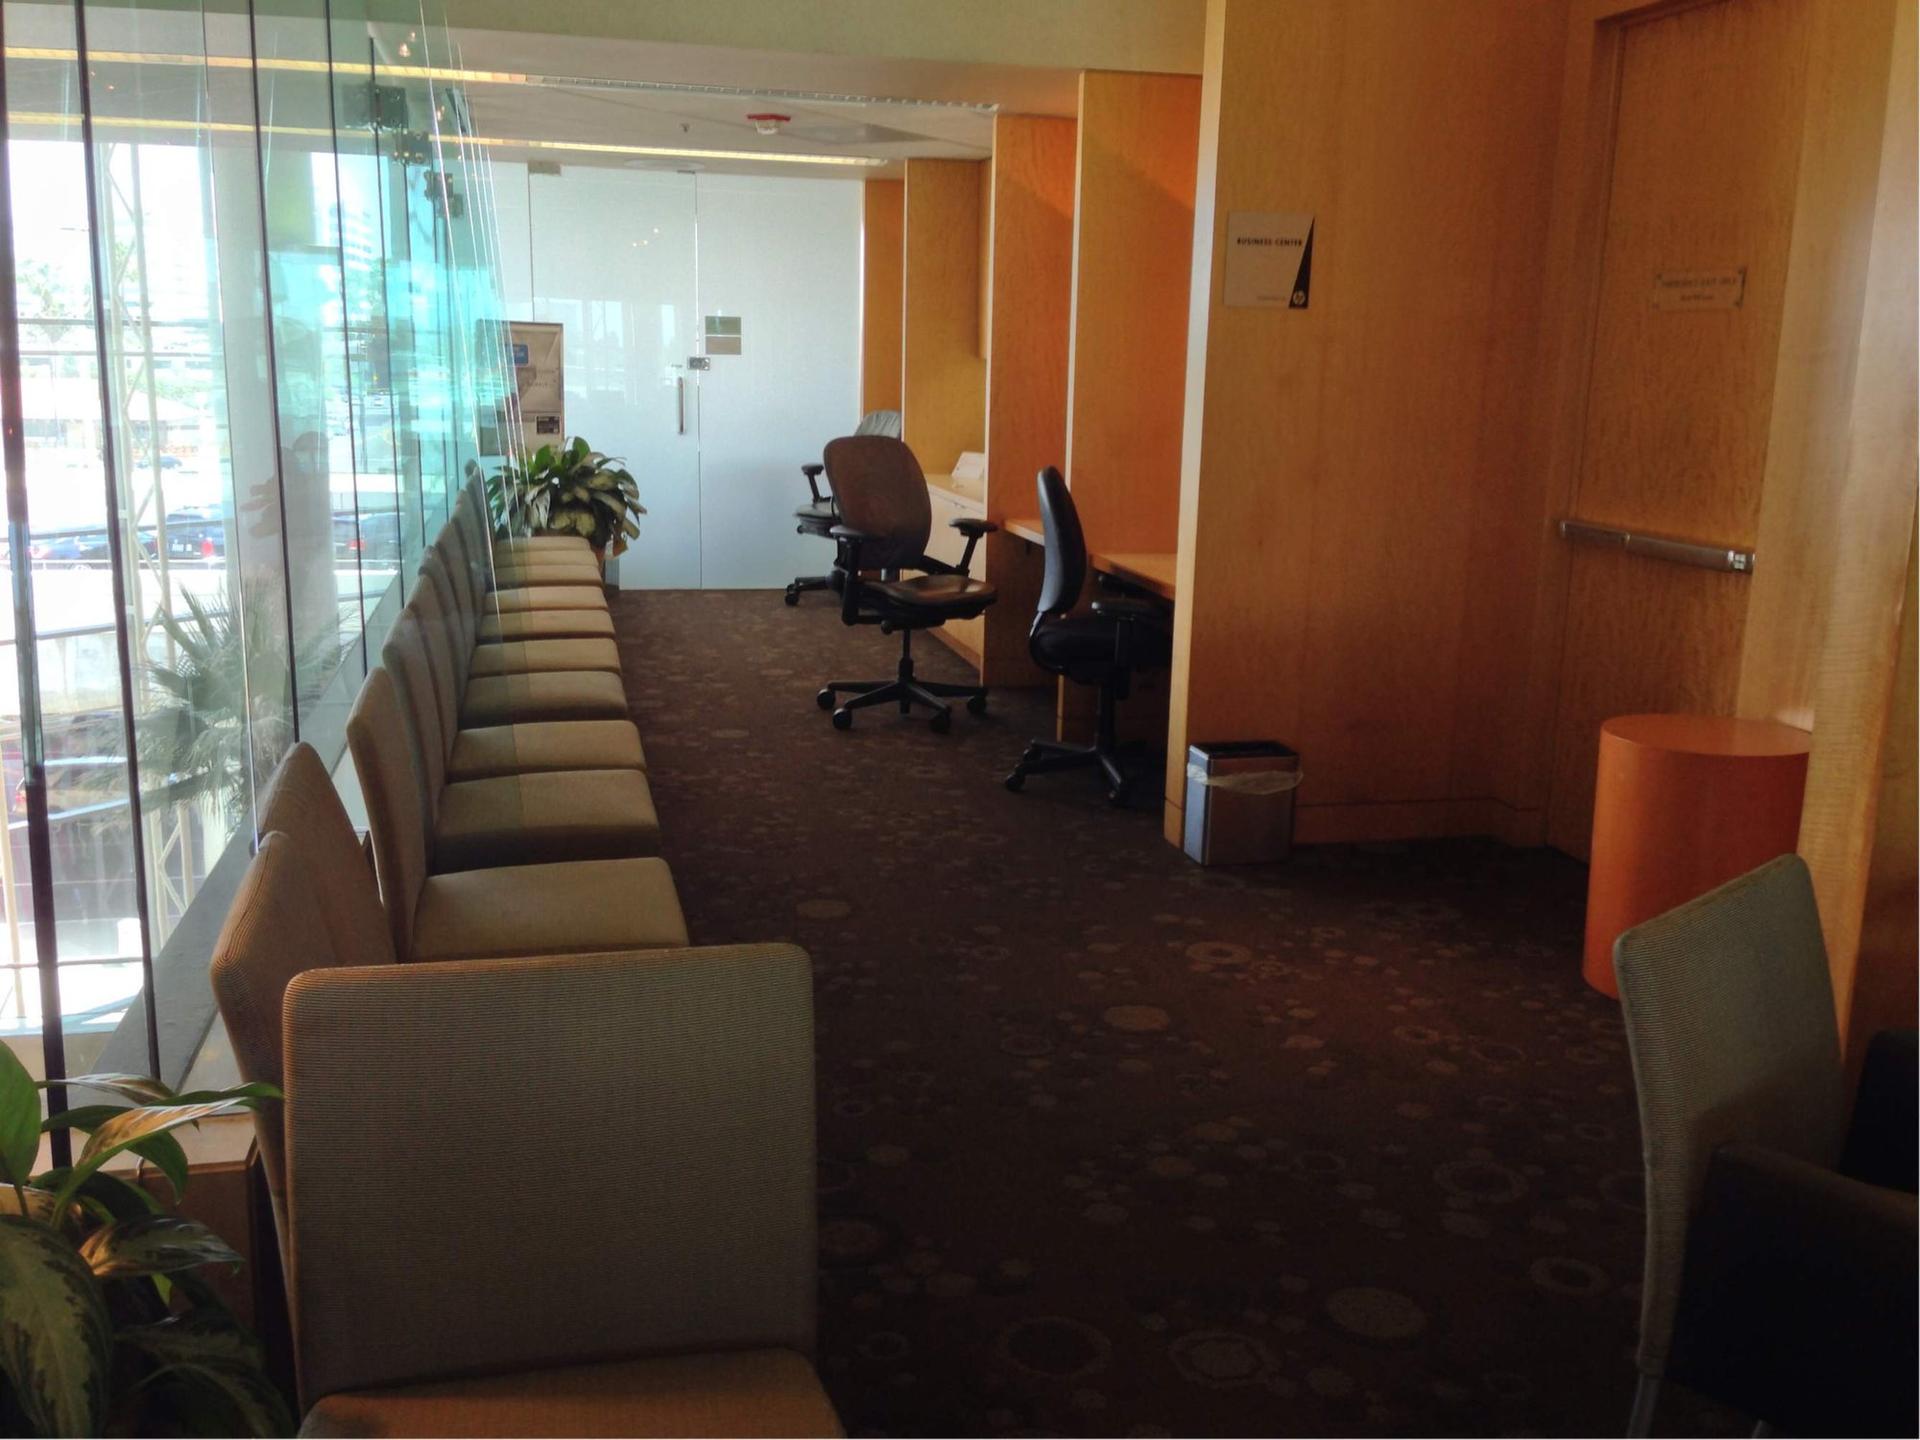 American Airlines Admirals Club image 4 of 12